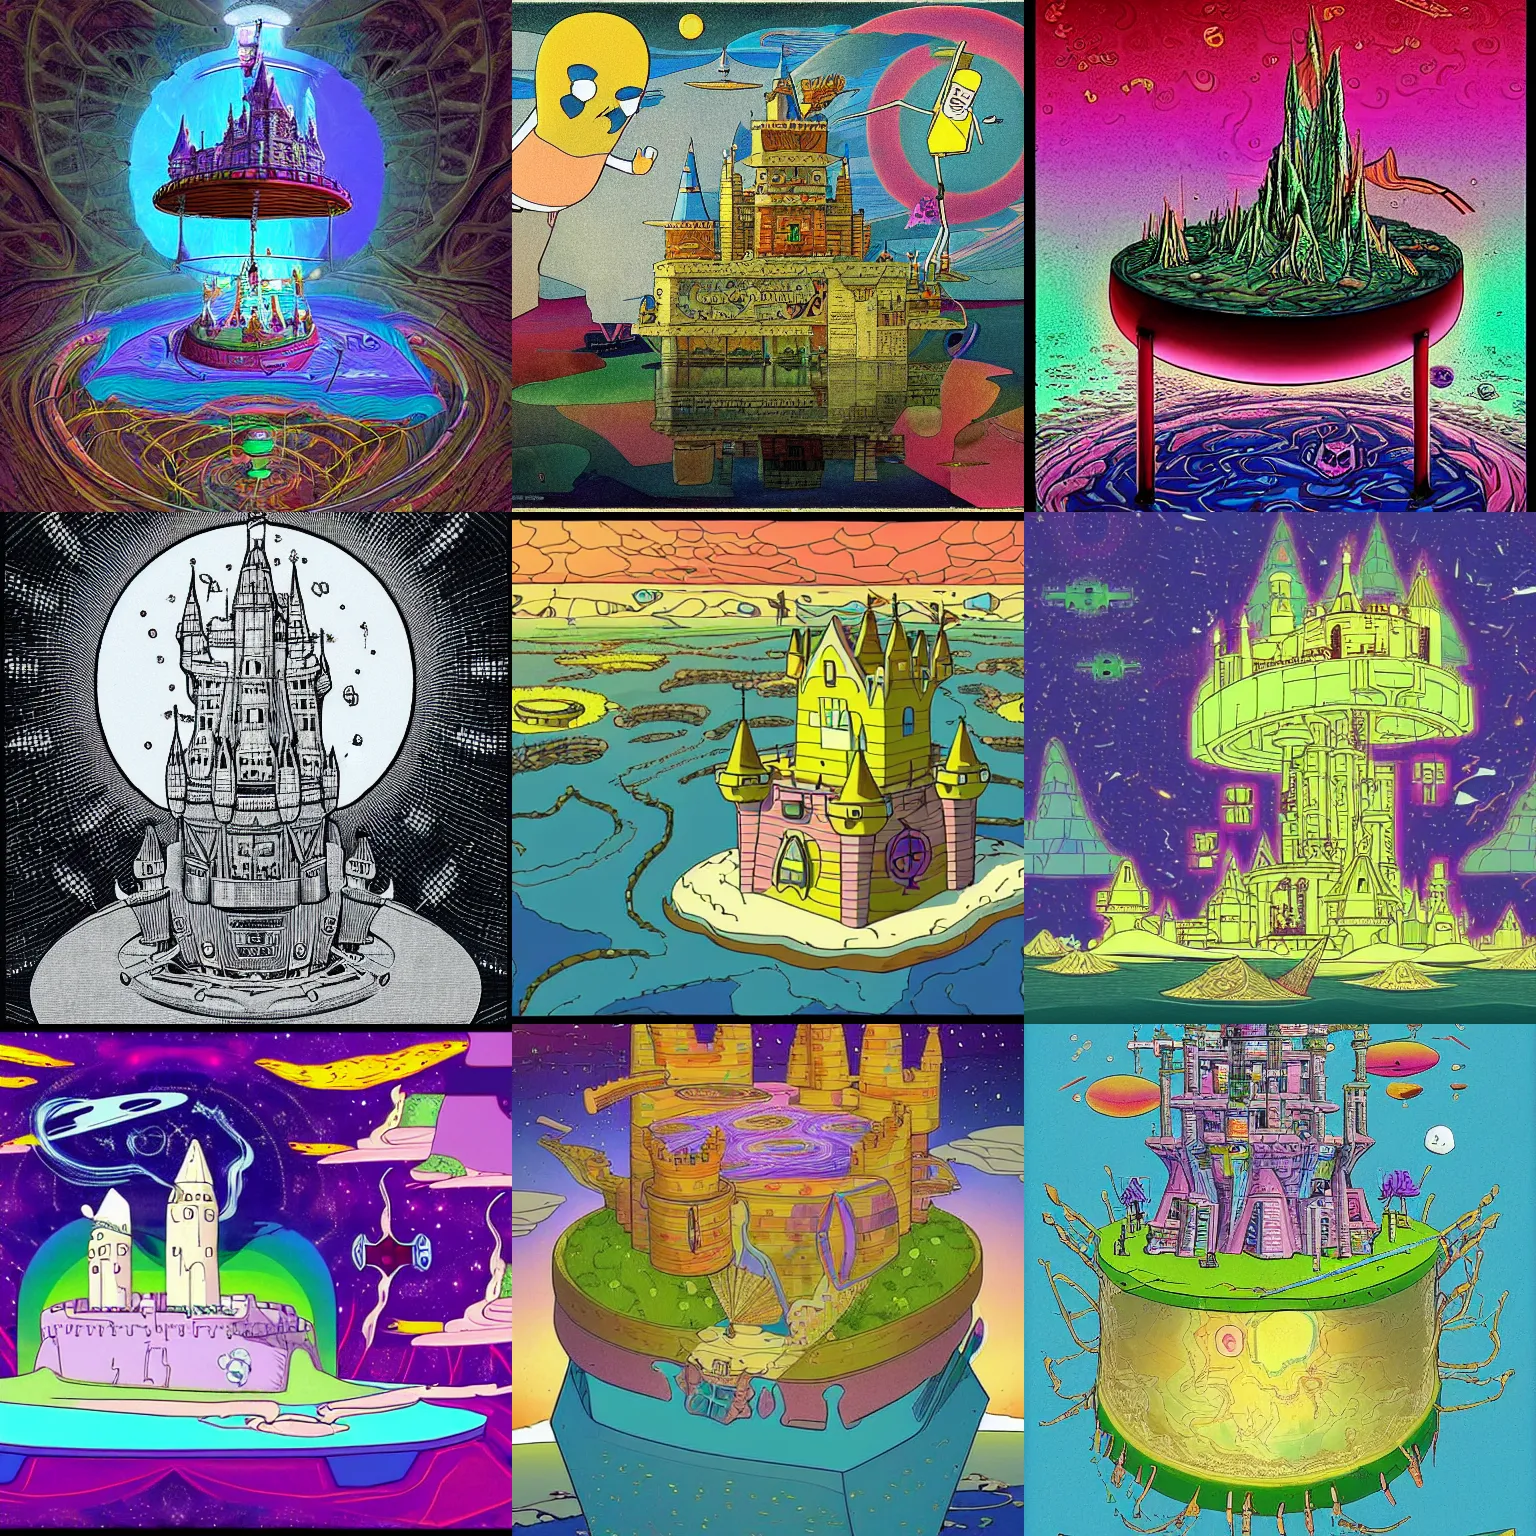 Prompt: a floating castle with tapestries of a gravimetric shear in spacetime viewed through the fractal lens of adalasion monotronics influenced by the art stile of sir herbert mazelfritz in the early romantic period, in the world of adventure time, rick and morty, the widespread economic collapse of the early 1 9 0 0's, man playing guitar,